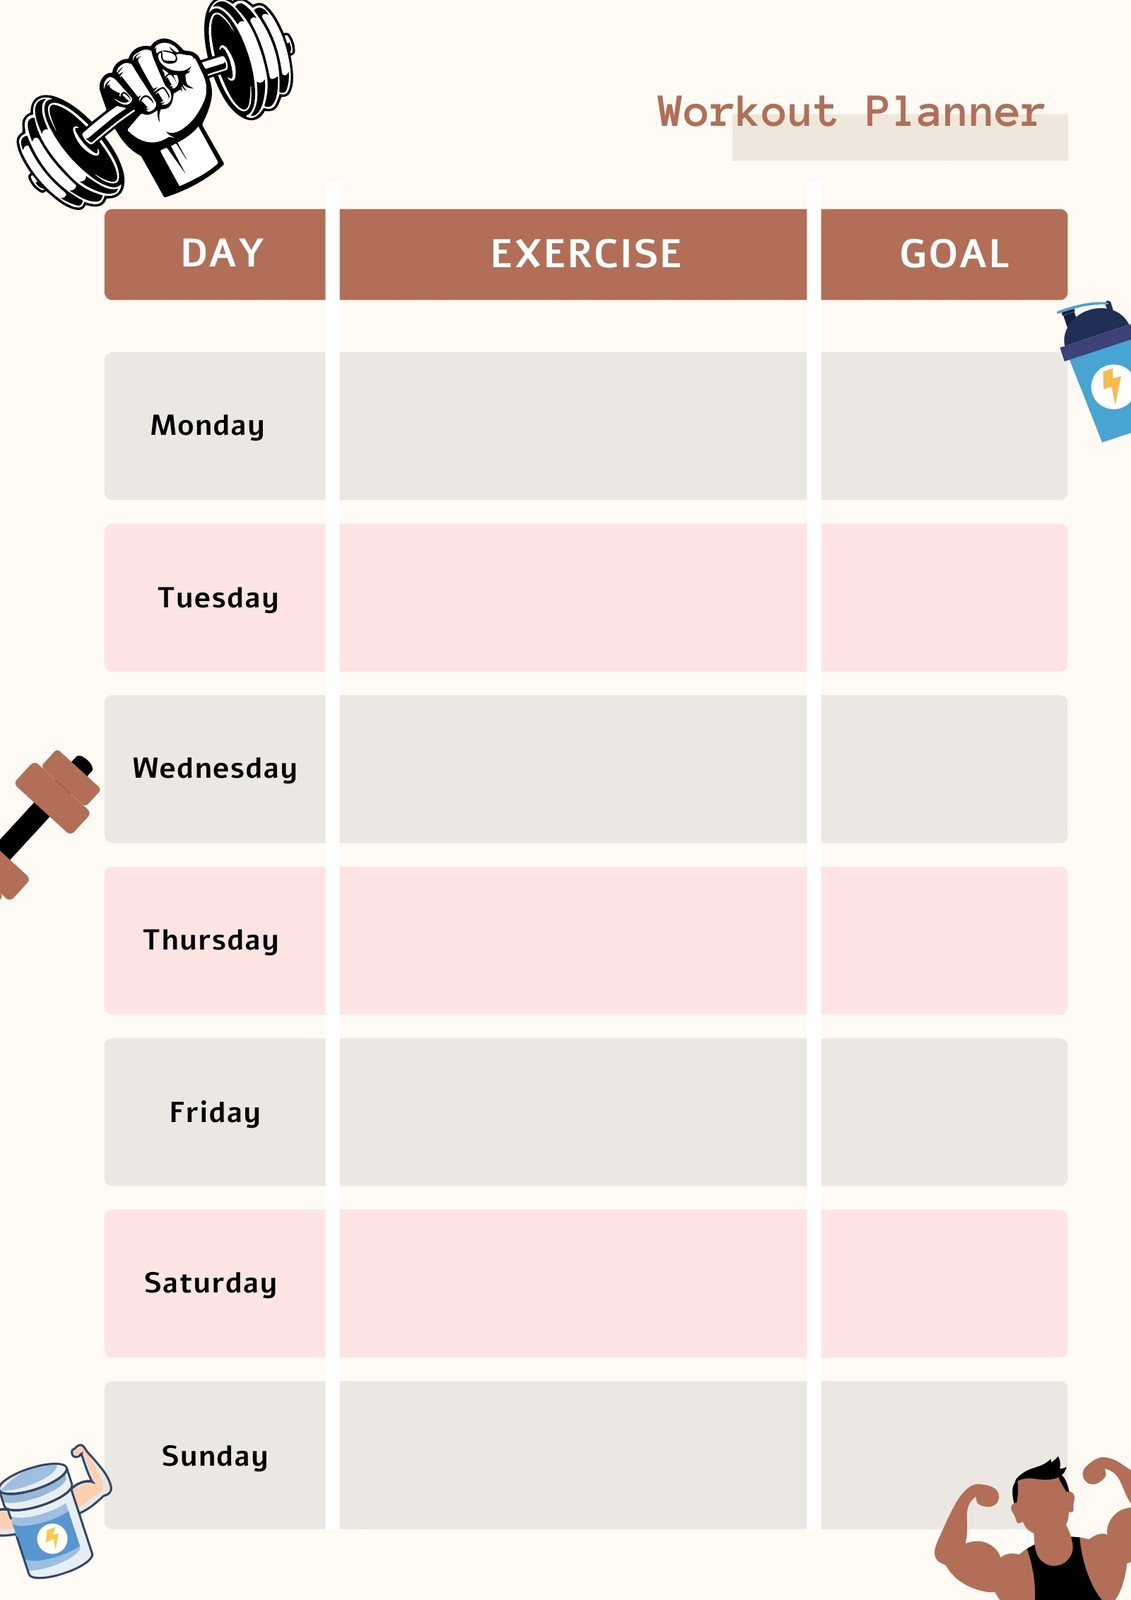 Printable Home Workout Plan: Get Fit at Home with Ease